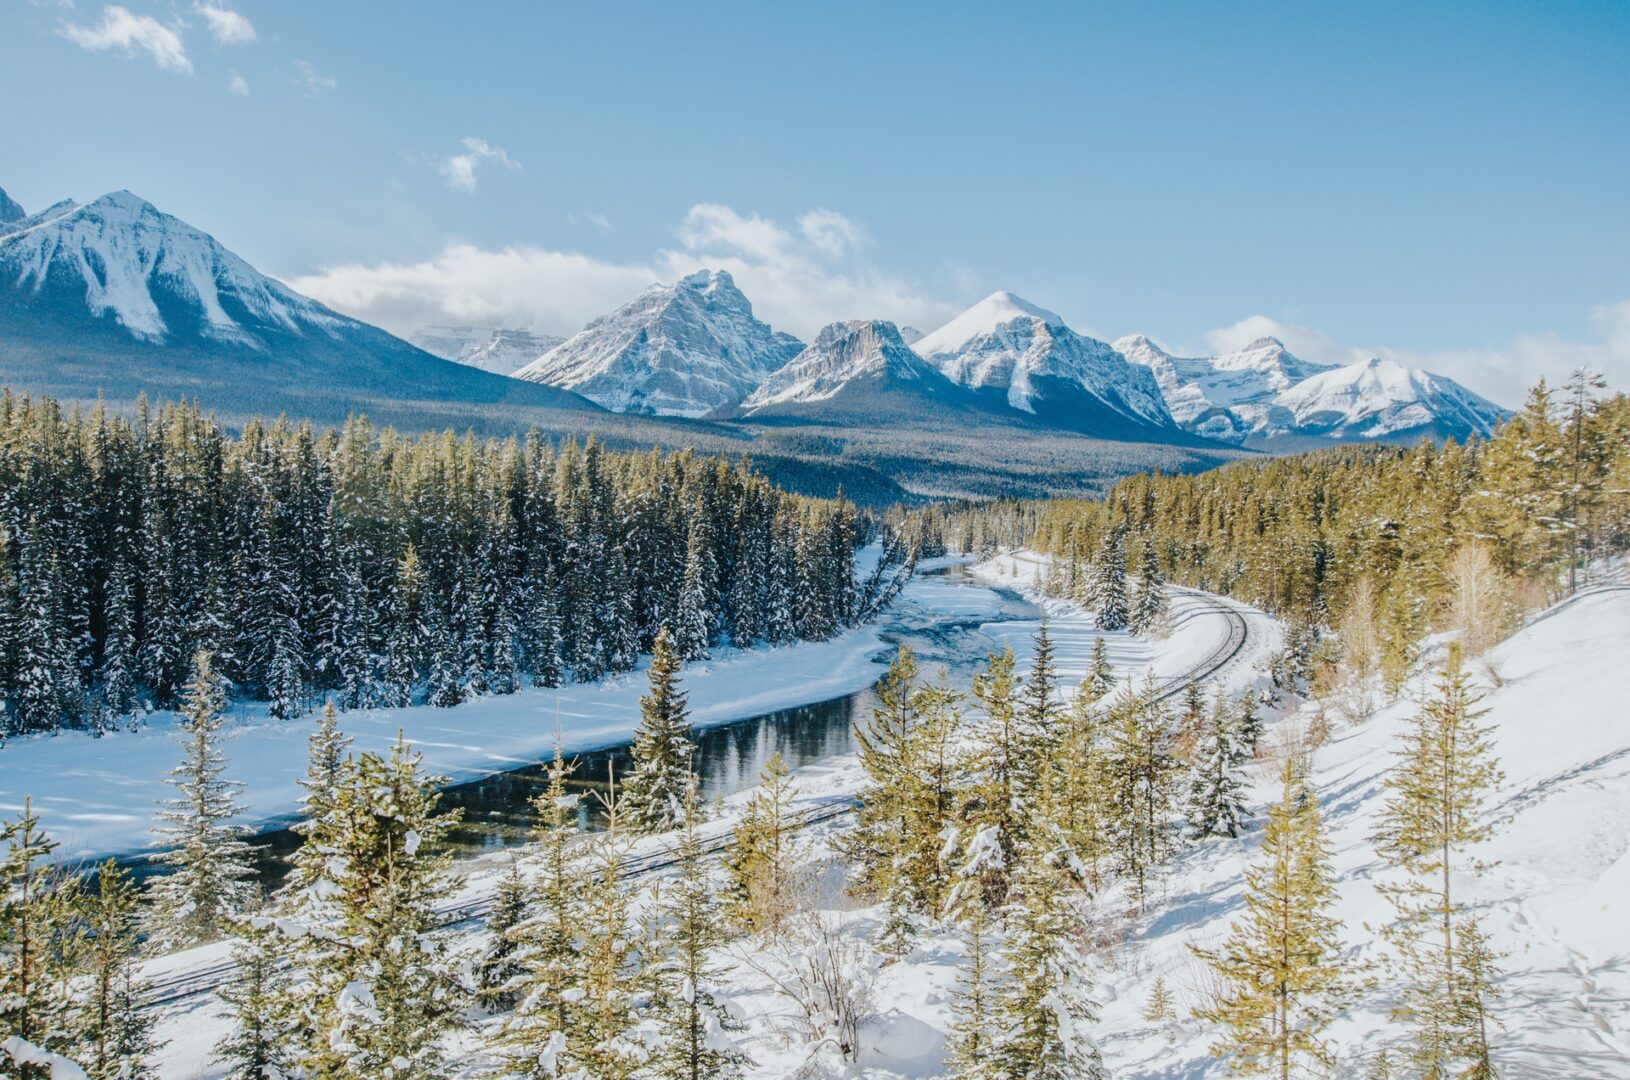 Morant's curve in Banff during a classic Canadian winter